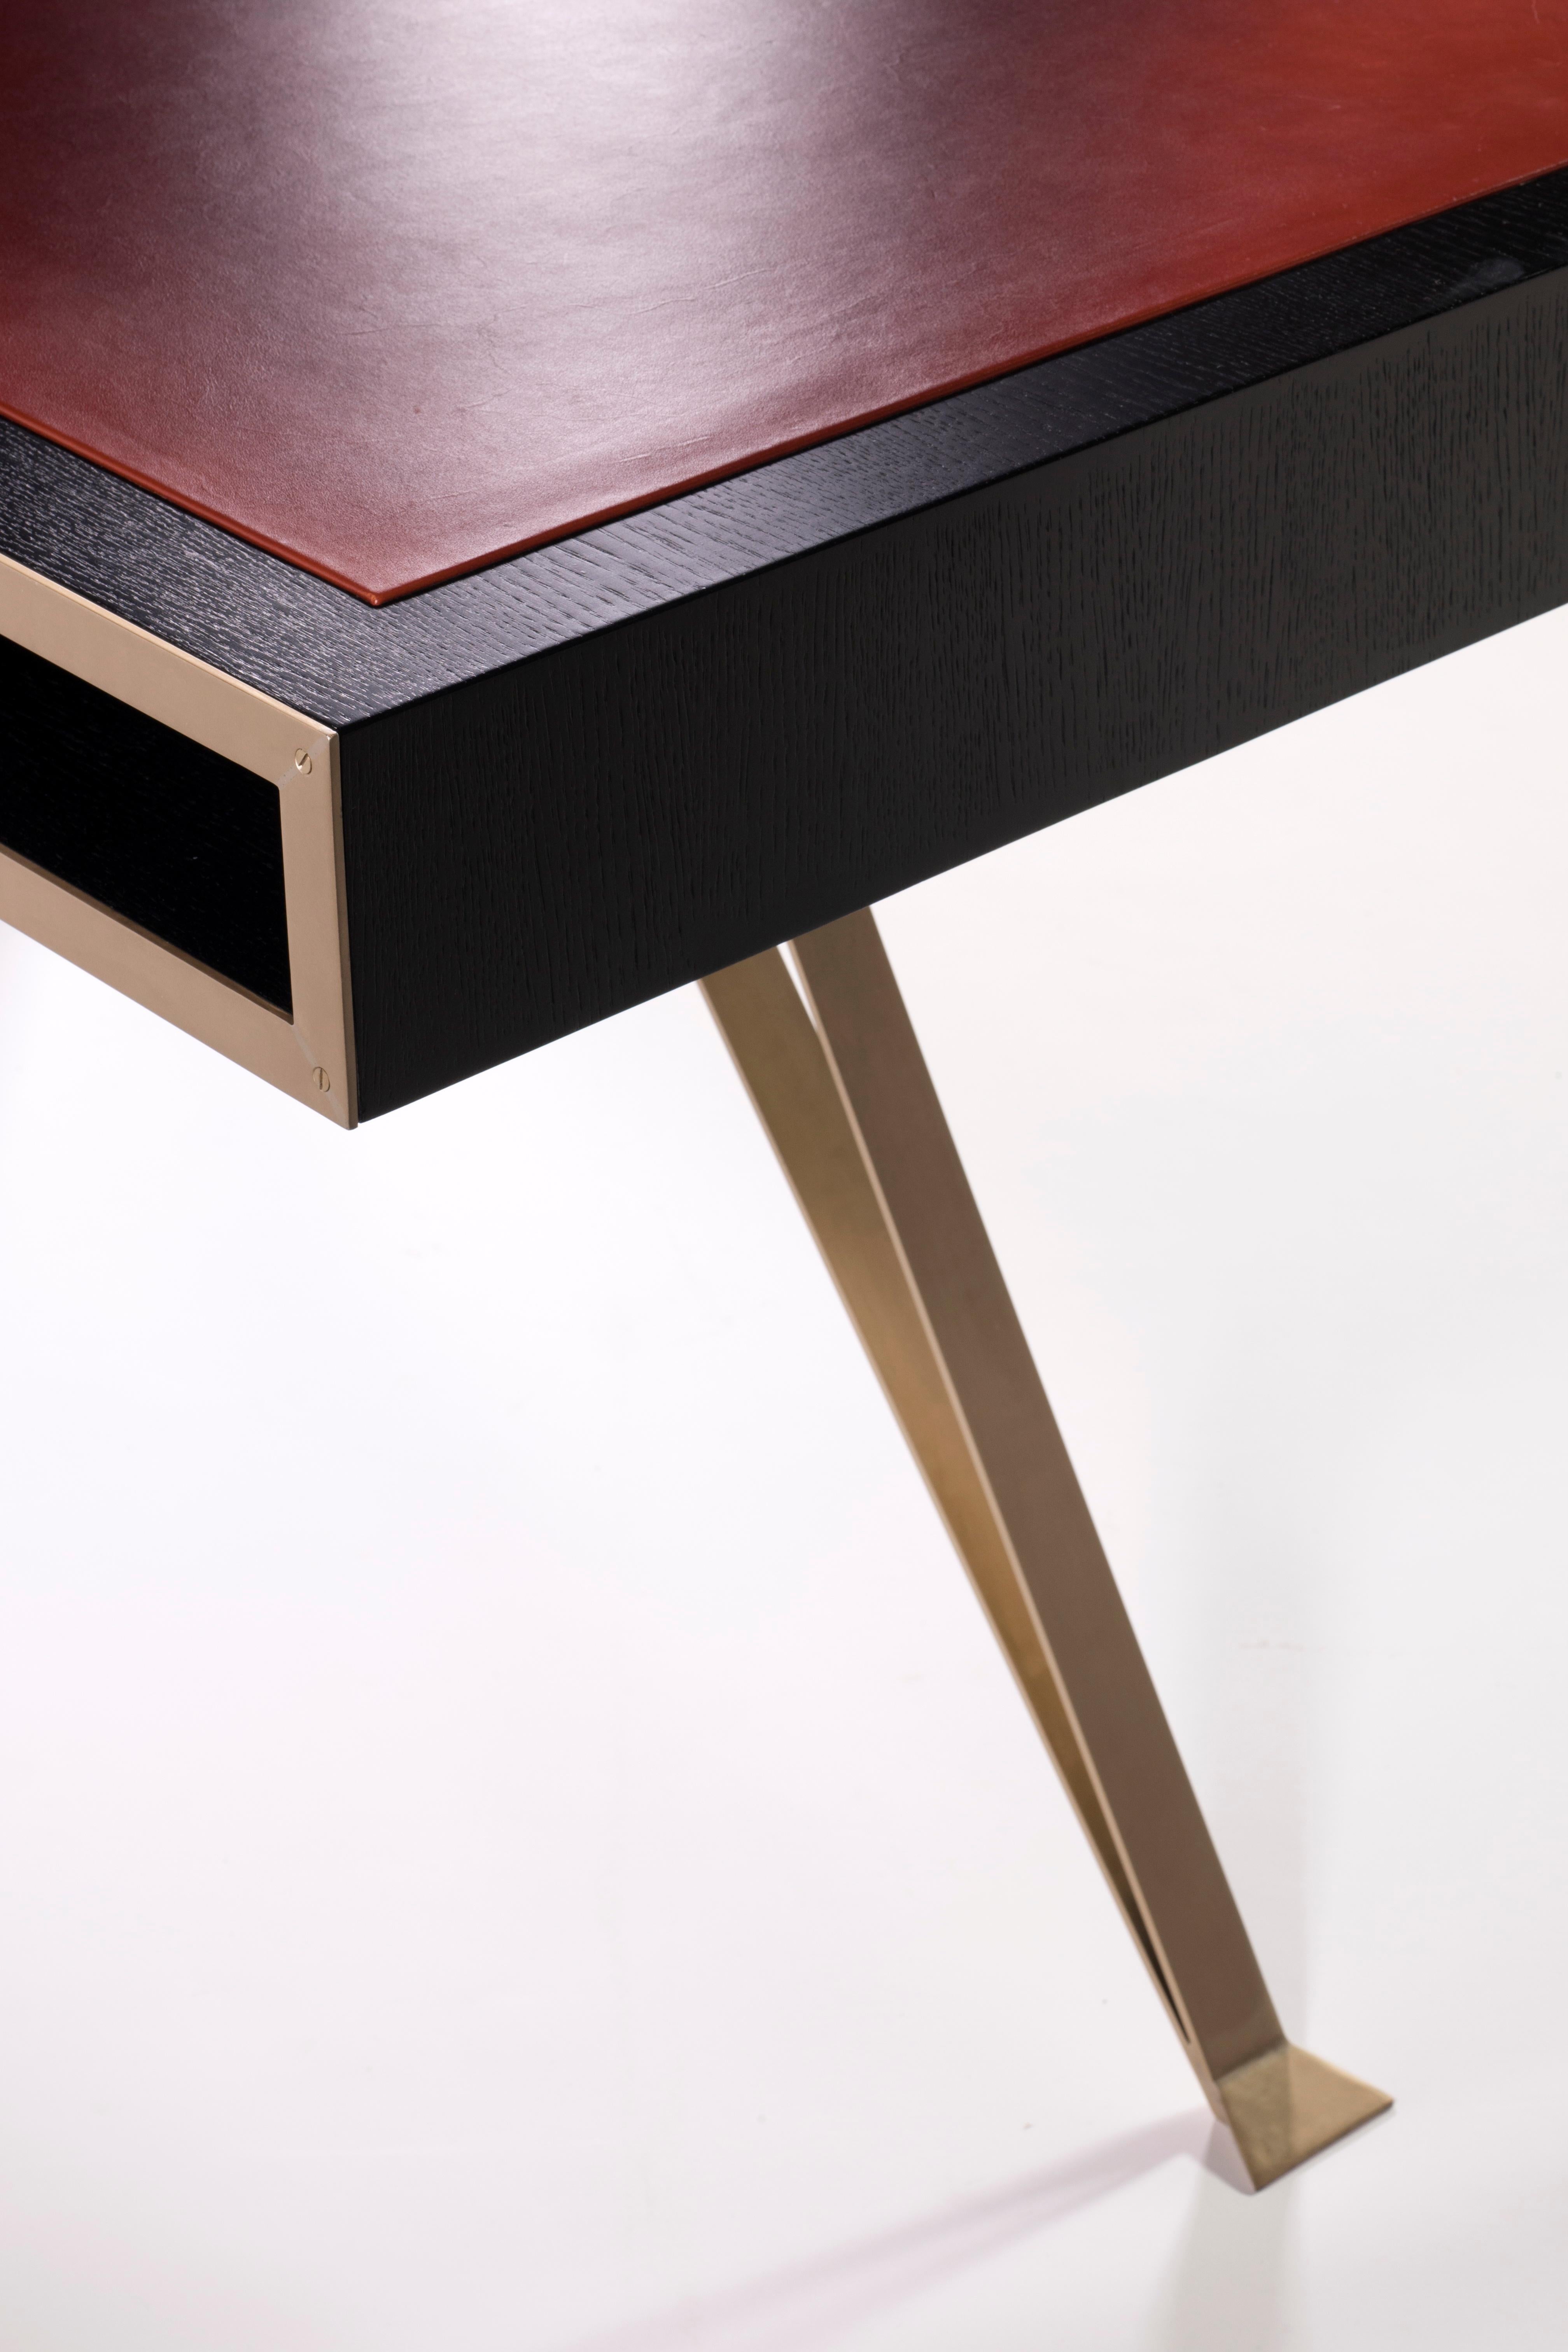 An oak, brass and leather writing desk
B.B. - Strong contrasting materials combine – I love how the boxy table and drawers seem to float and balance on different tripod legs. Note the wide open shelf-like storage space underneath the writing